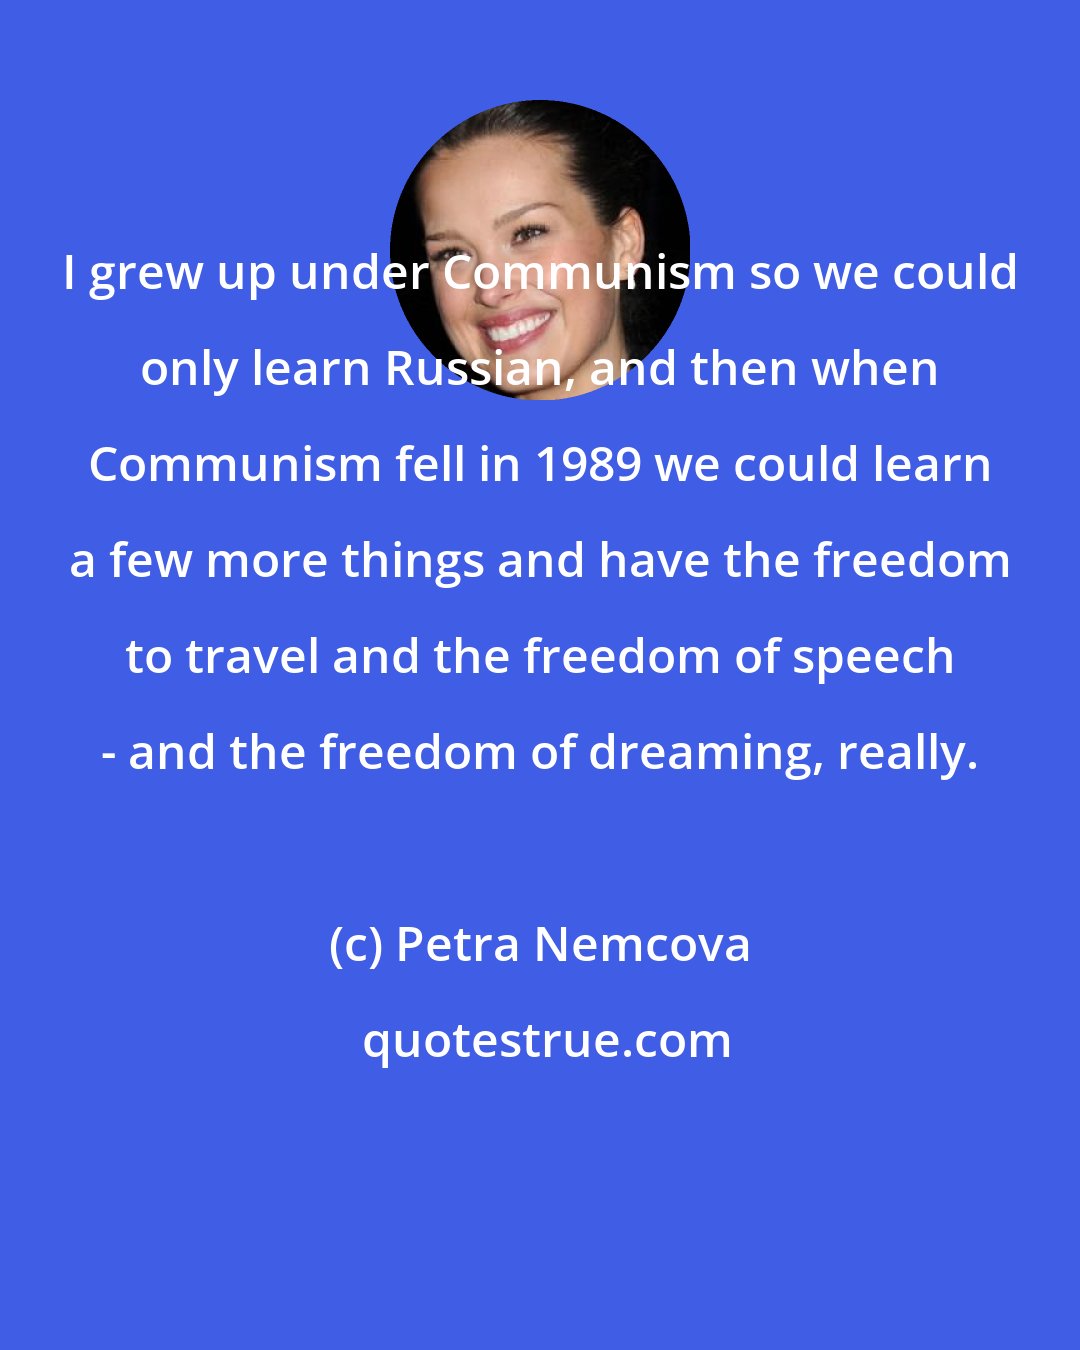 Petra Nemcova: I grew up under Communism so we could only learn Russian, and then when Communism fell in 1989 we could learn a few more things and have the freedom to travel and the freedom of speech - and the freedom of dreaming, really.